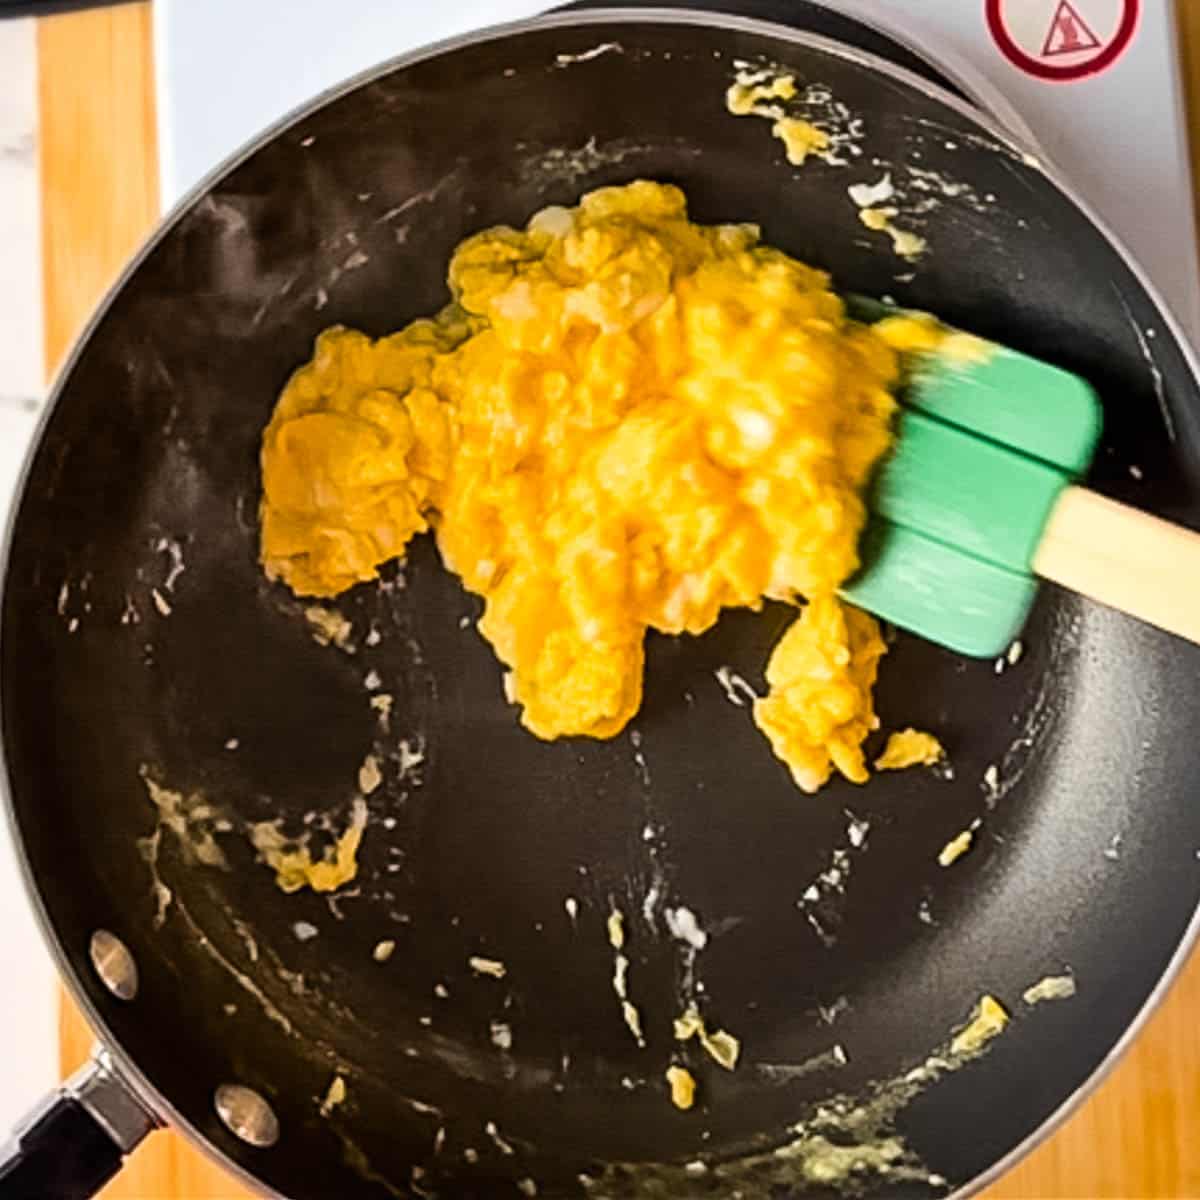 cooked scrambled eggs are scooped out of the pan with a rubber spatula.